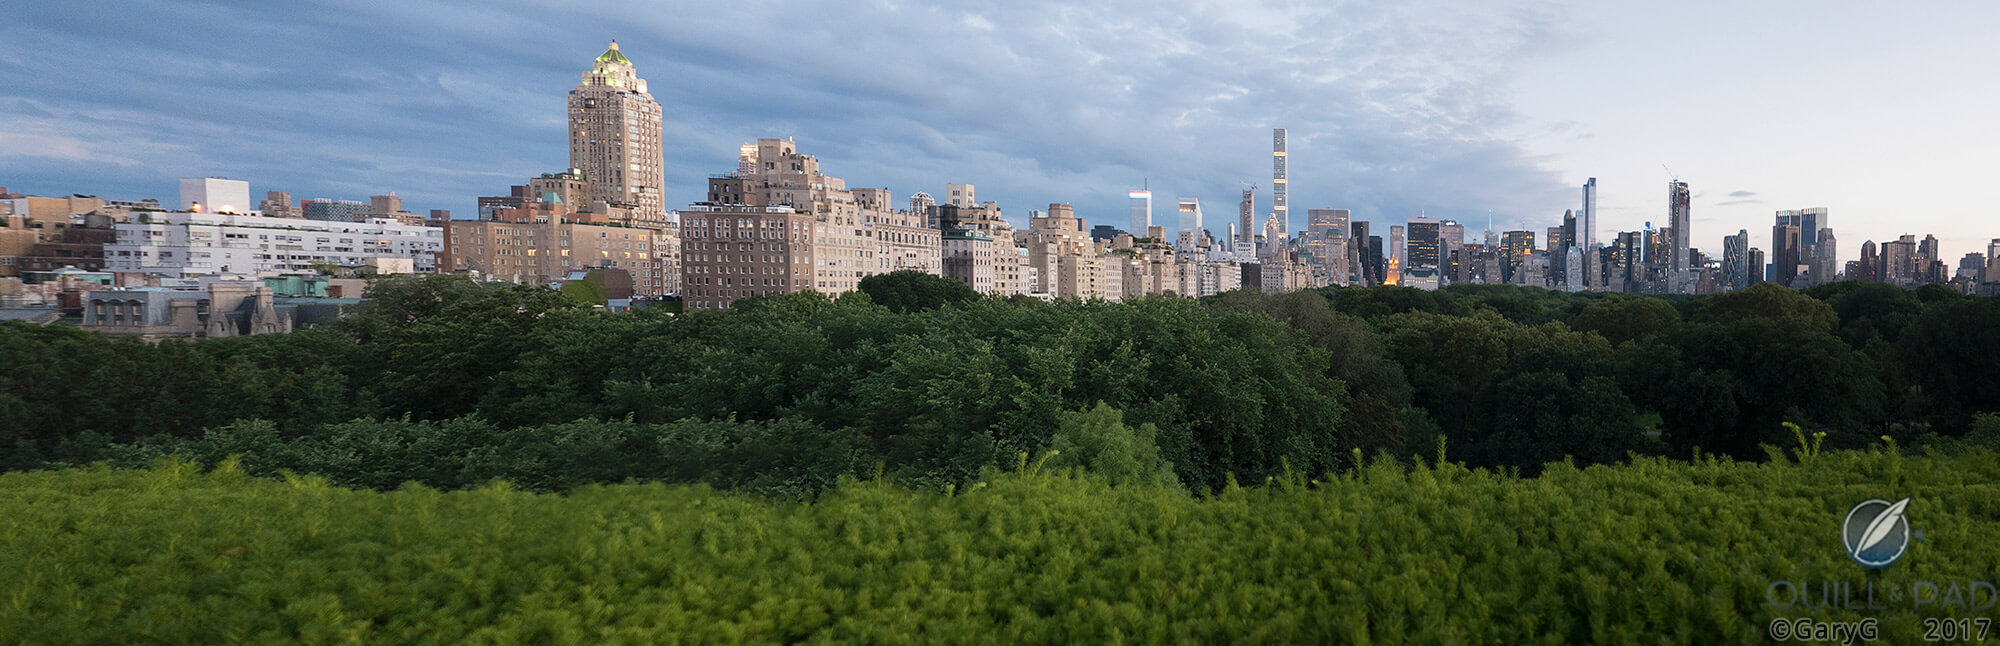 New York as seen from the roof of the Metropolitan Museum of Art, July 2017